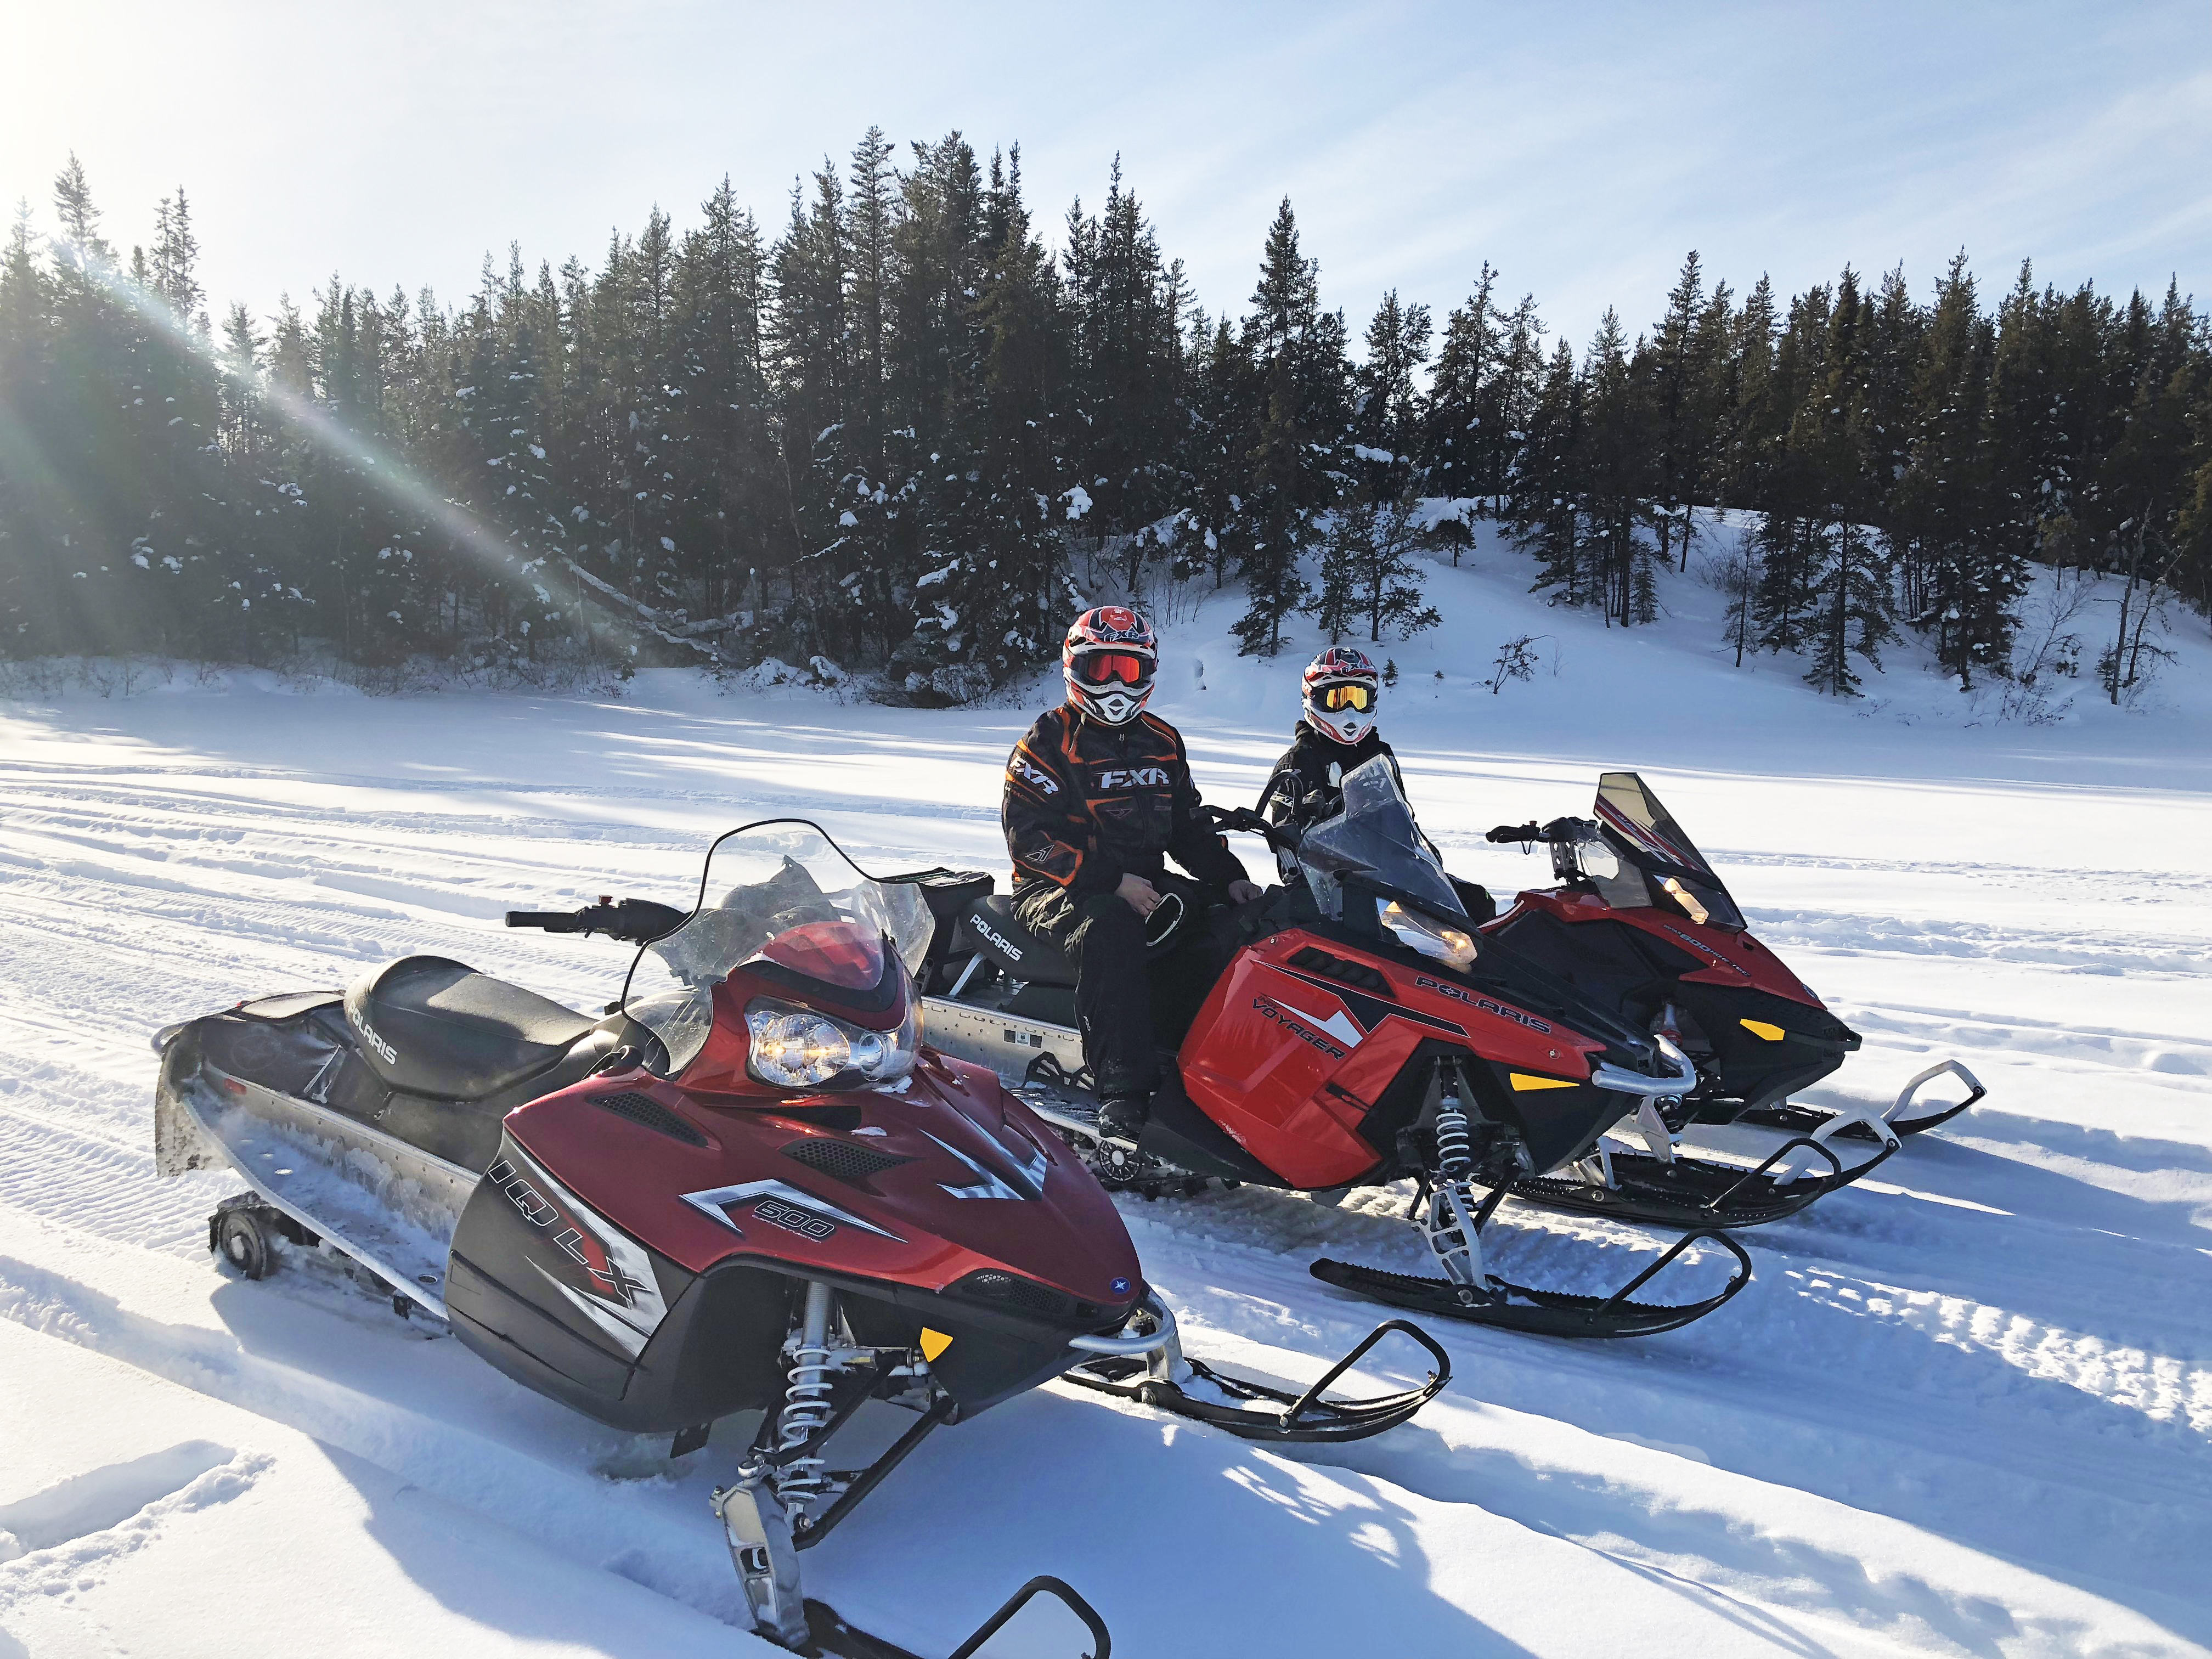 Three stationary snowmobiles, two with people sitting on them, on a flat trail with trees in the background